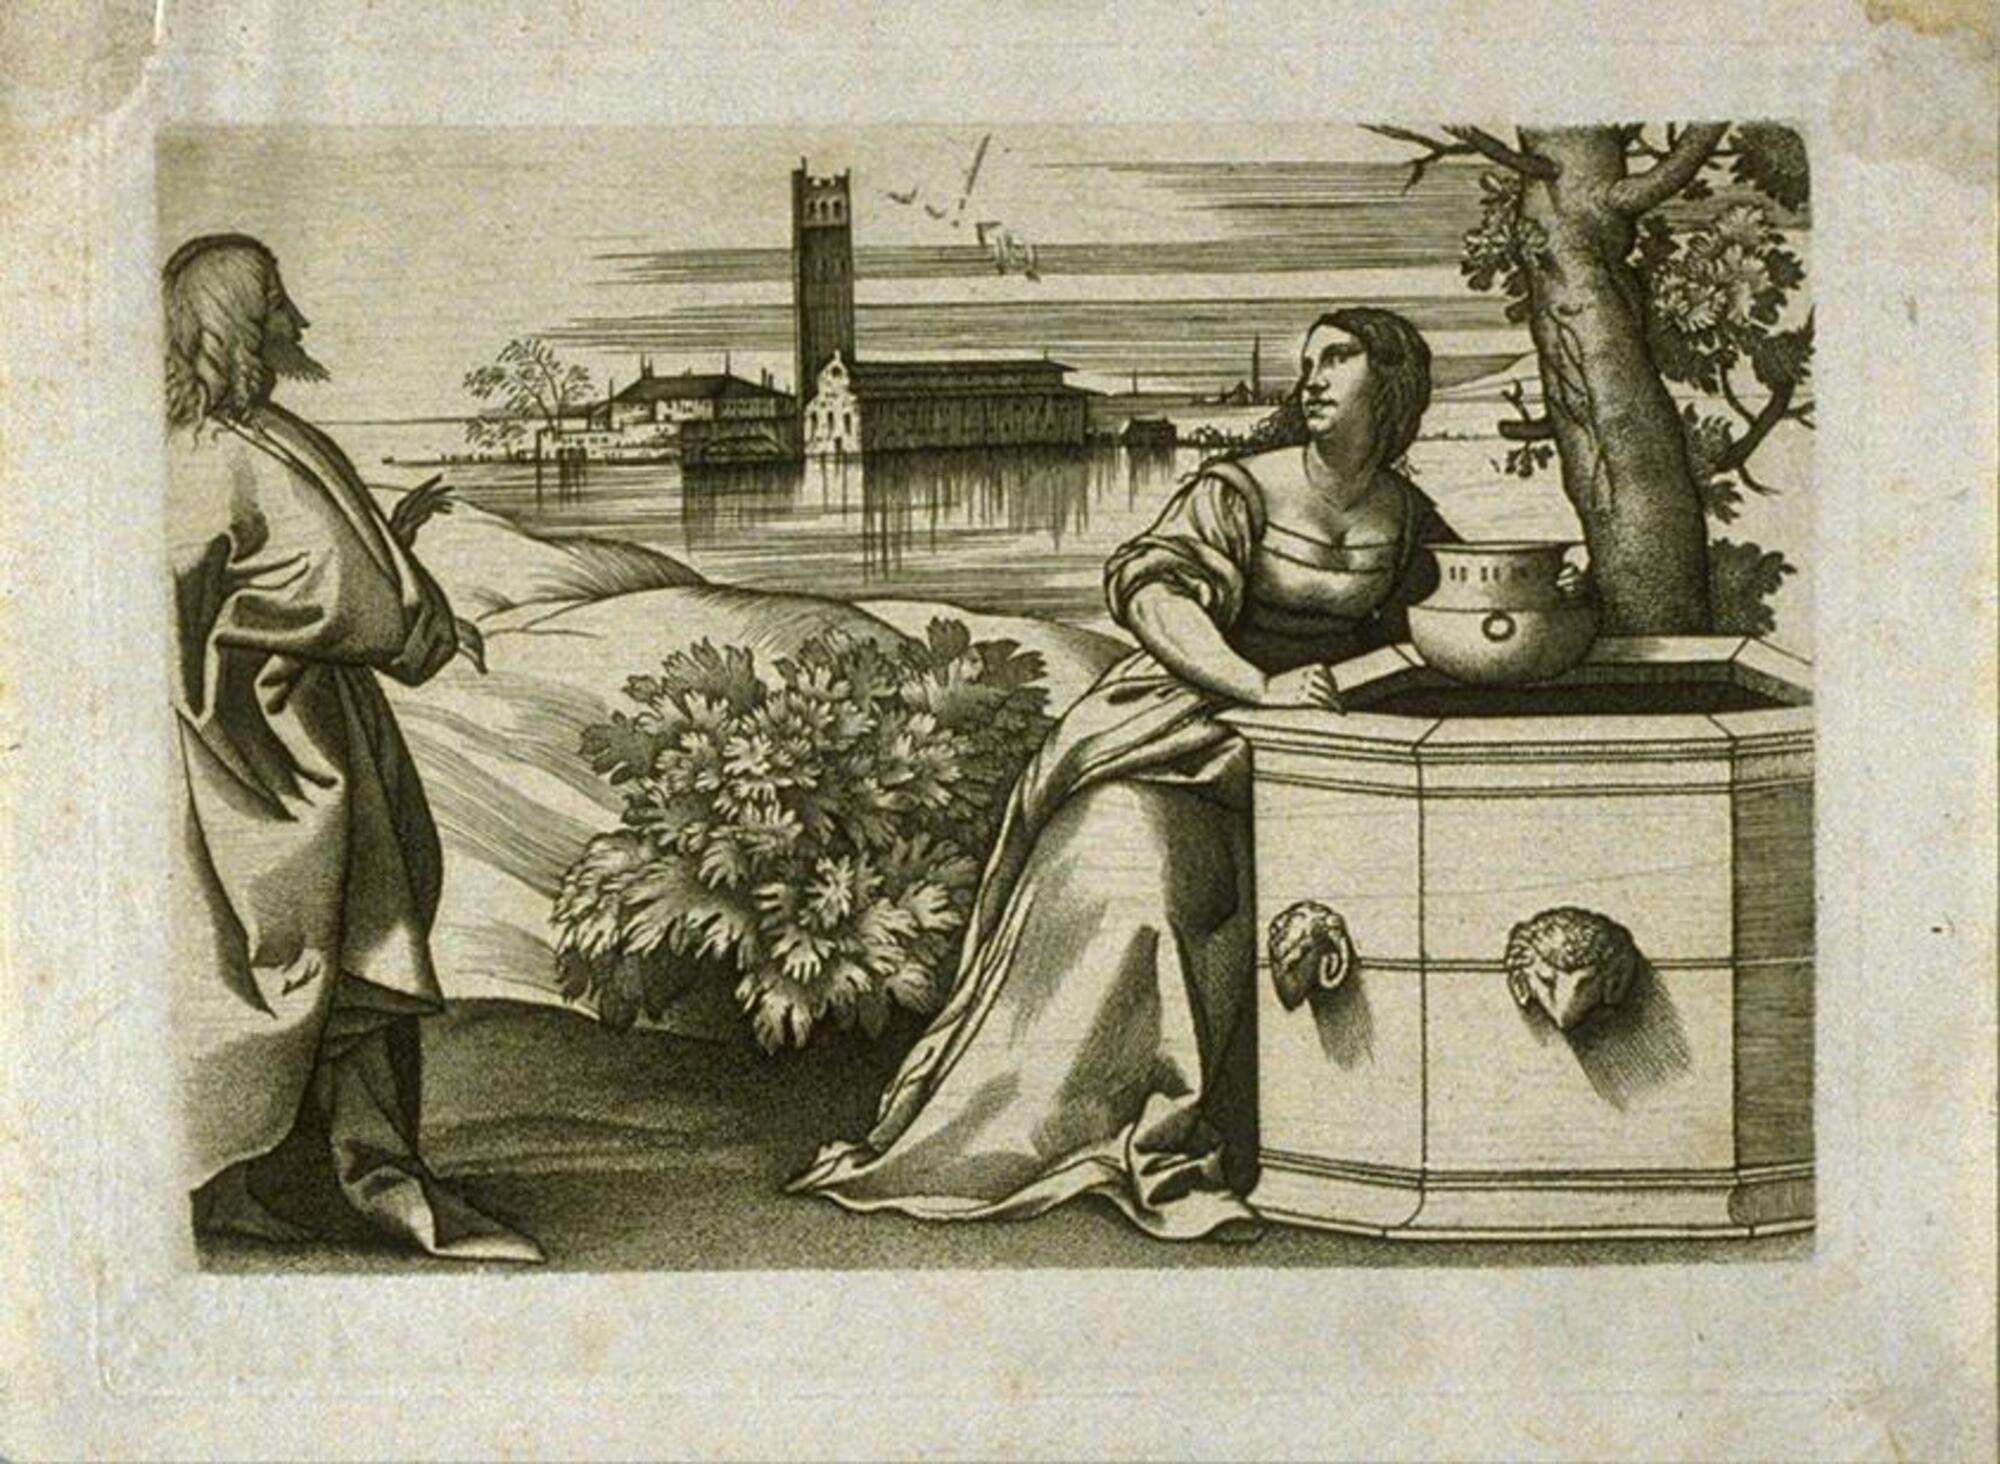 Woman holding basin leans against hexagonal well, Christ approaches from left. Set against a still body of water, interupted by buildings. Larson 2/12/18&nbsp;<br />
&nbsp;